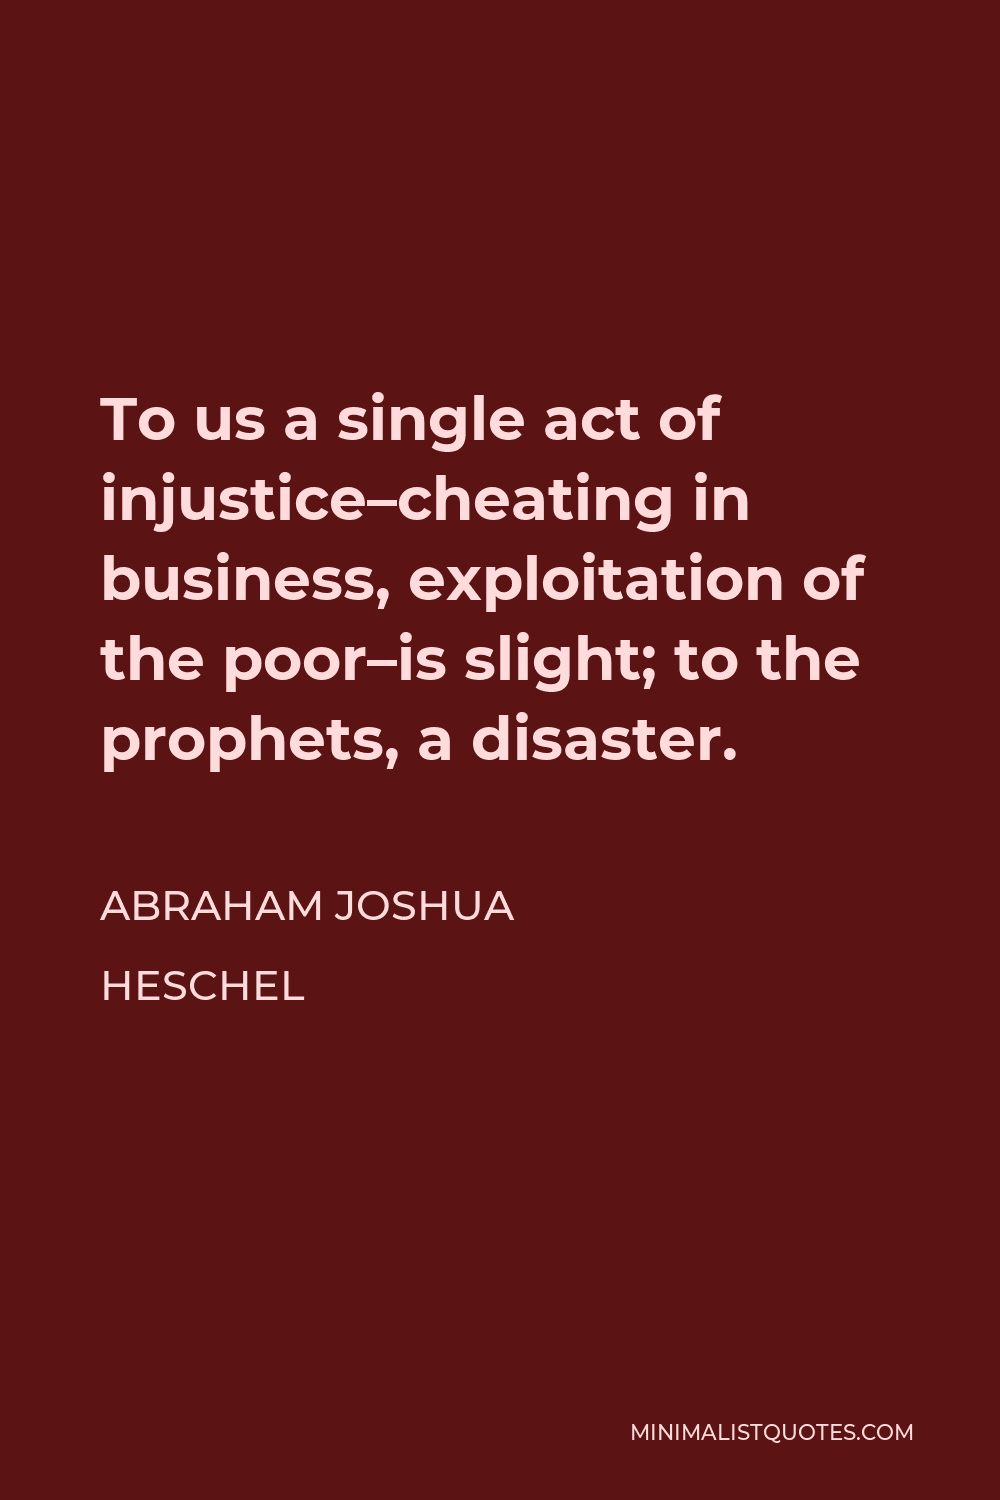 Abraham Joshua Heschel Quote - To us a single act of injustice–cheating in business, exploitation of the poor–is slight; to the prophets, a disaster.